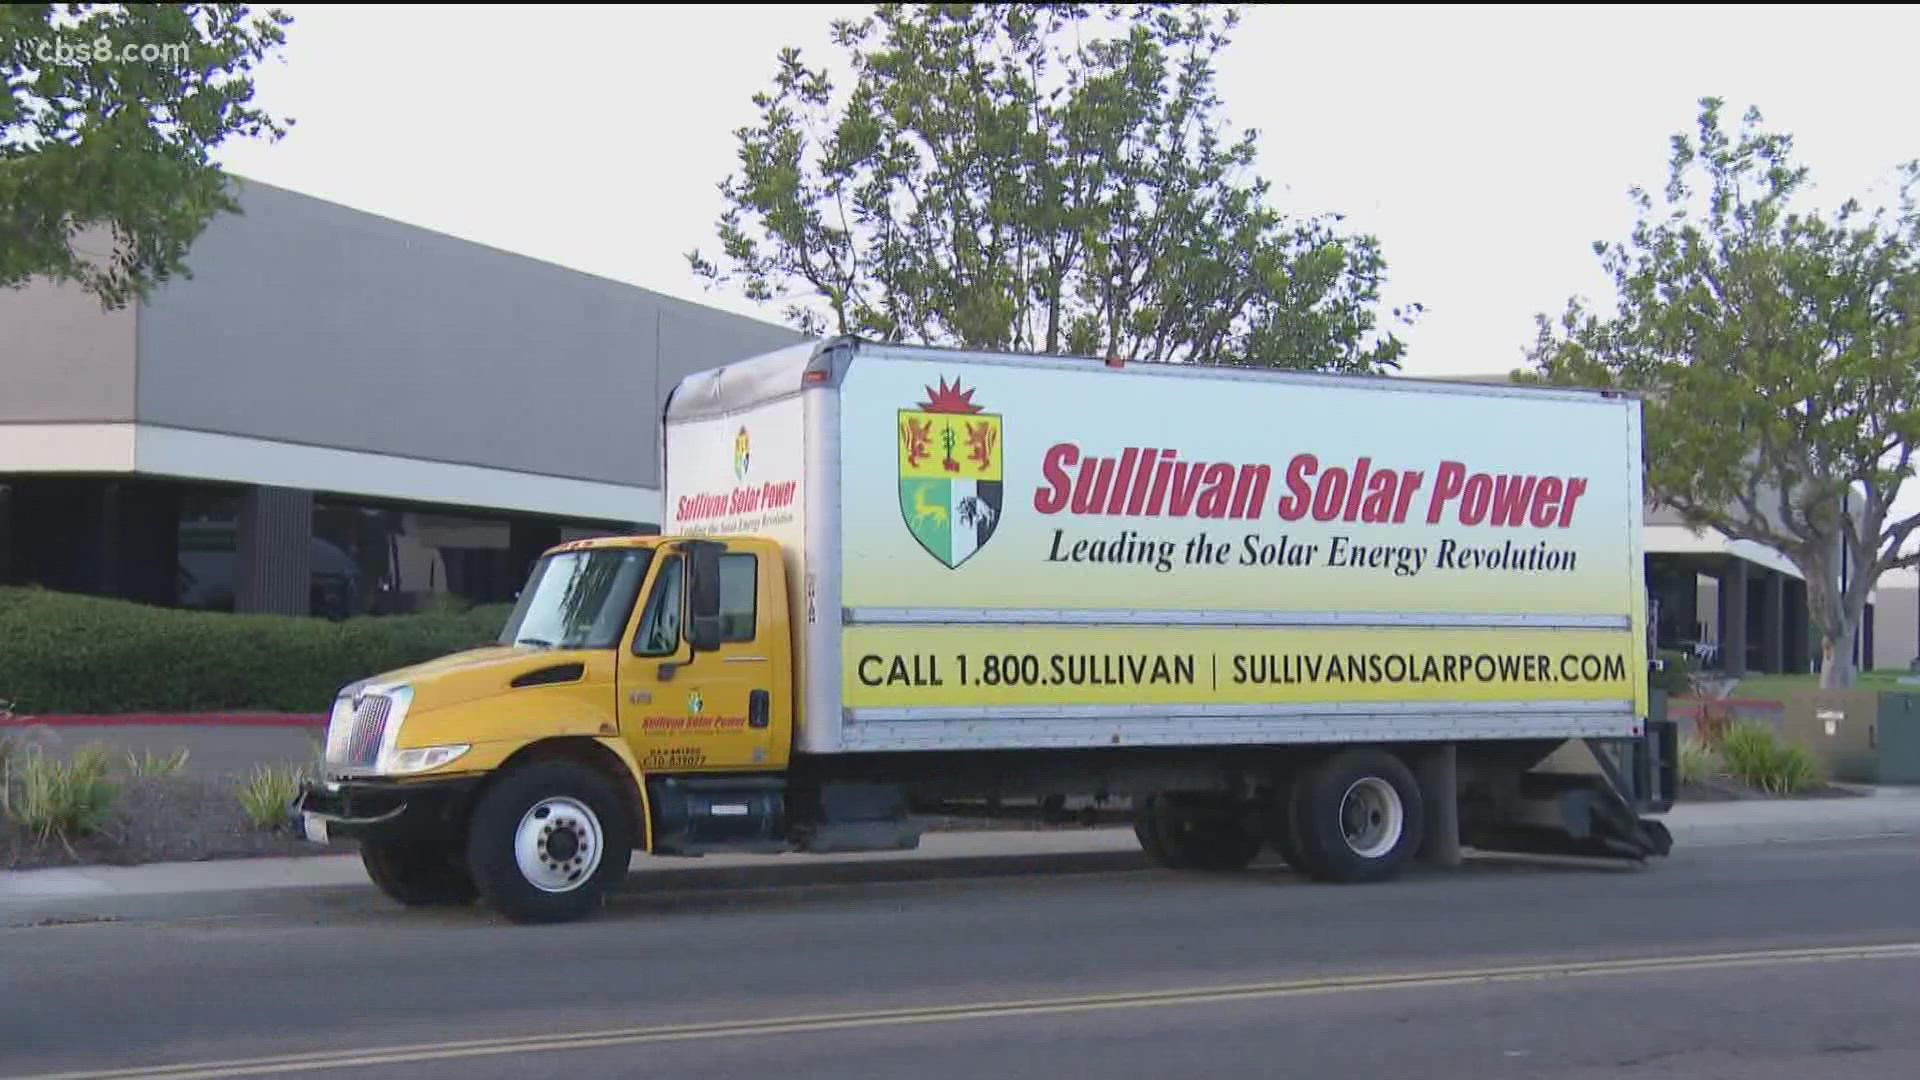 Sullivan Solar Power has served San Diegans since 2004, but recently many customers say it seems the company is no longer in service.